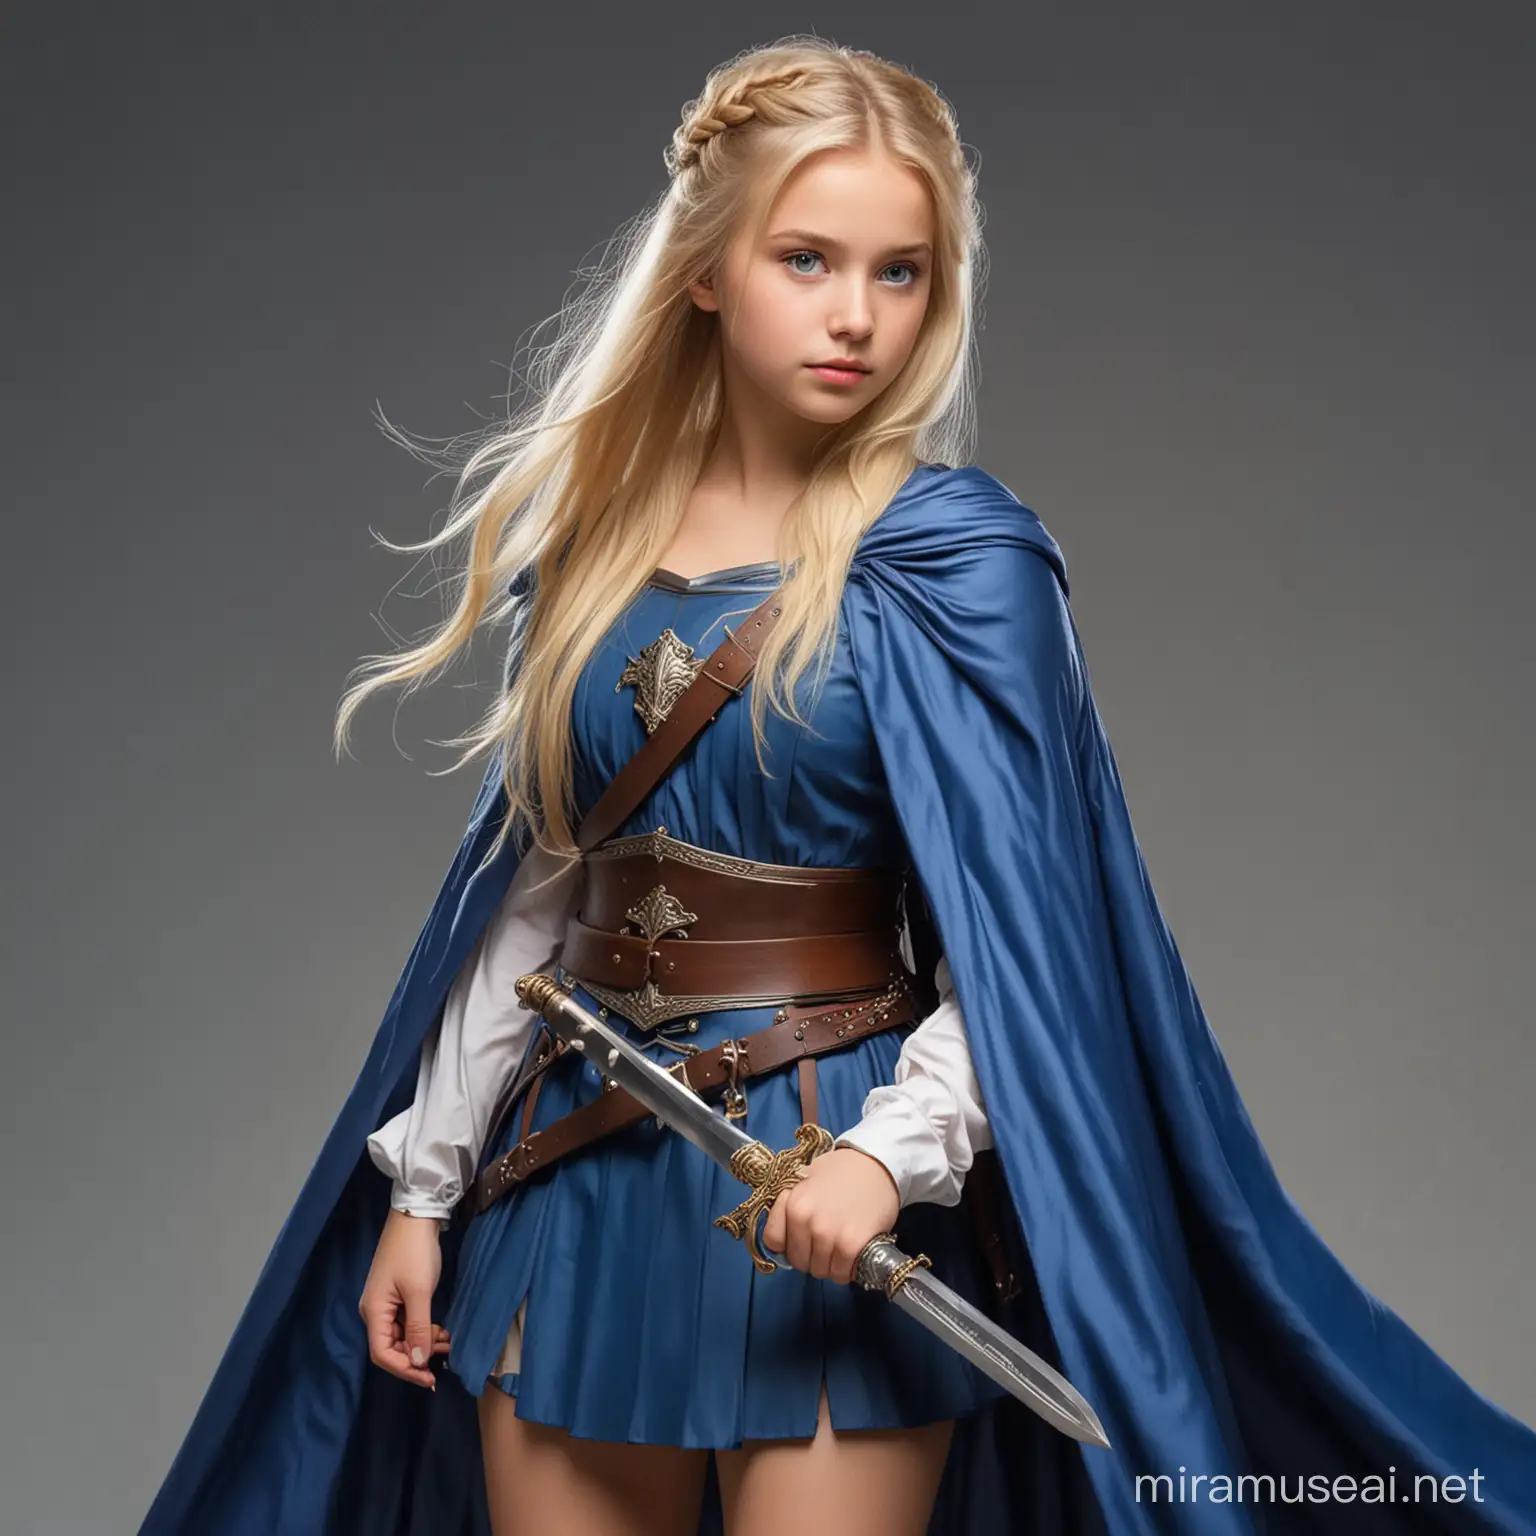 Attentive Daughter of a Knight with Blonde Hair and Sword